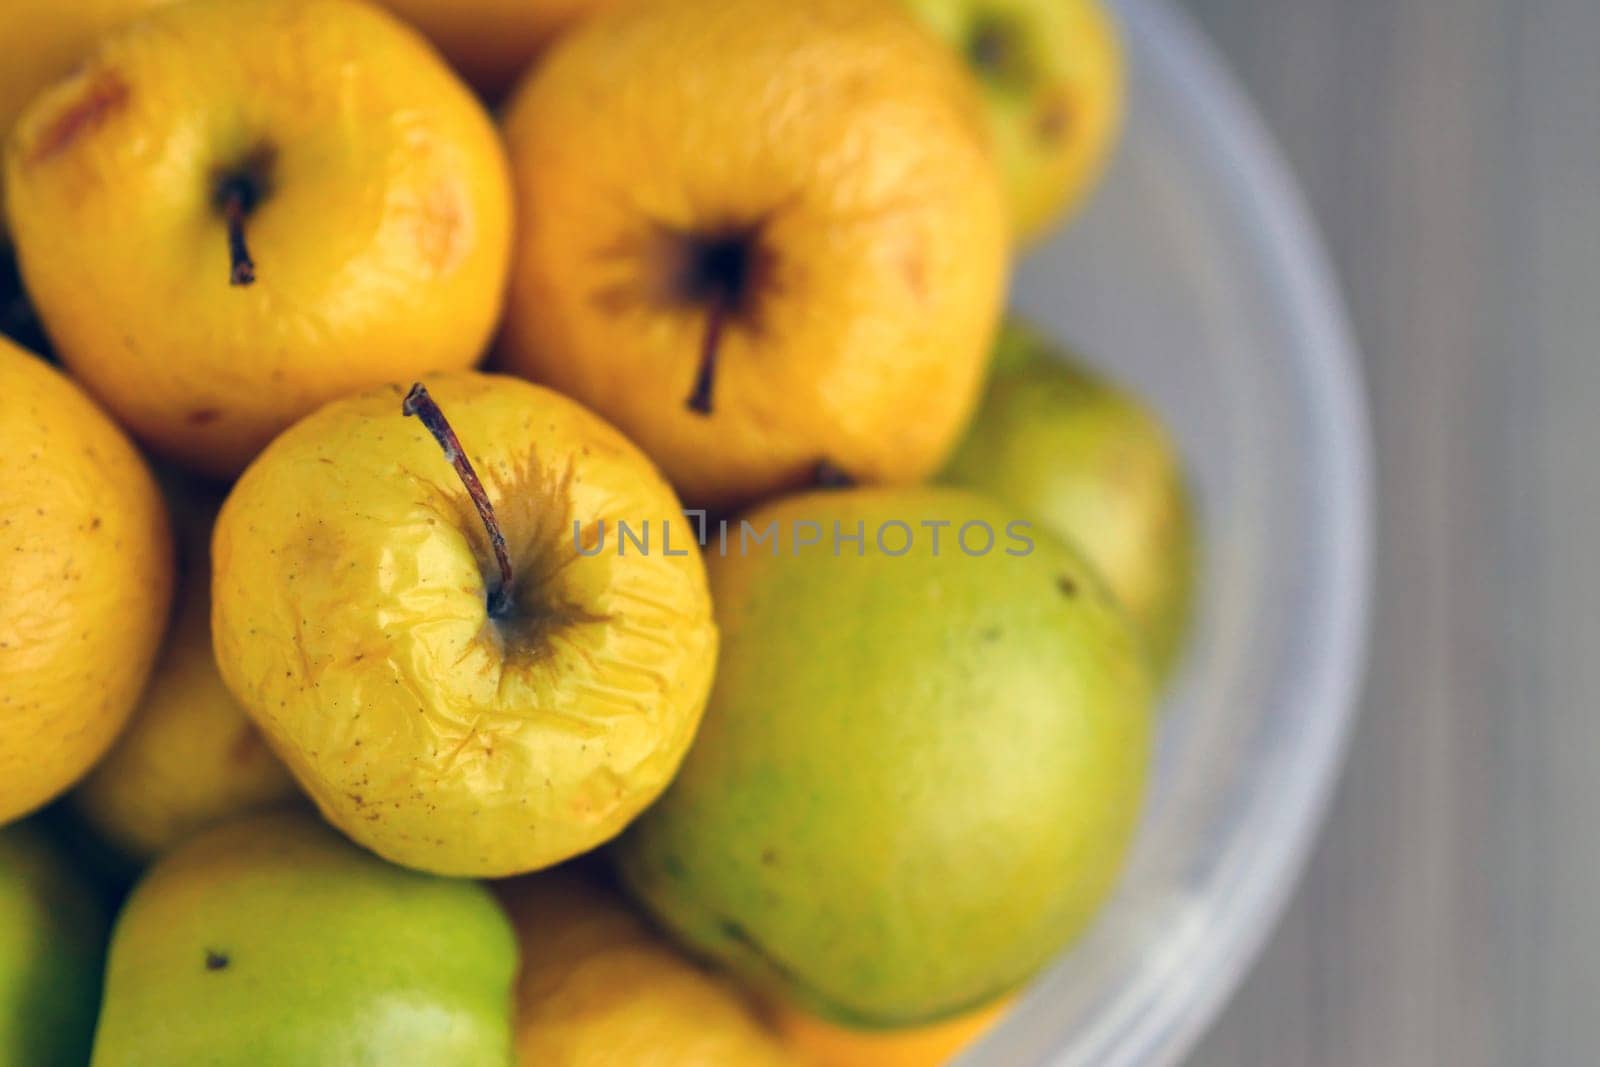 Rotting yellow apples, shriveled apples that have been sitting in a bowl for a long time, by nhatipoglu